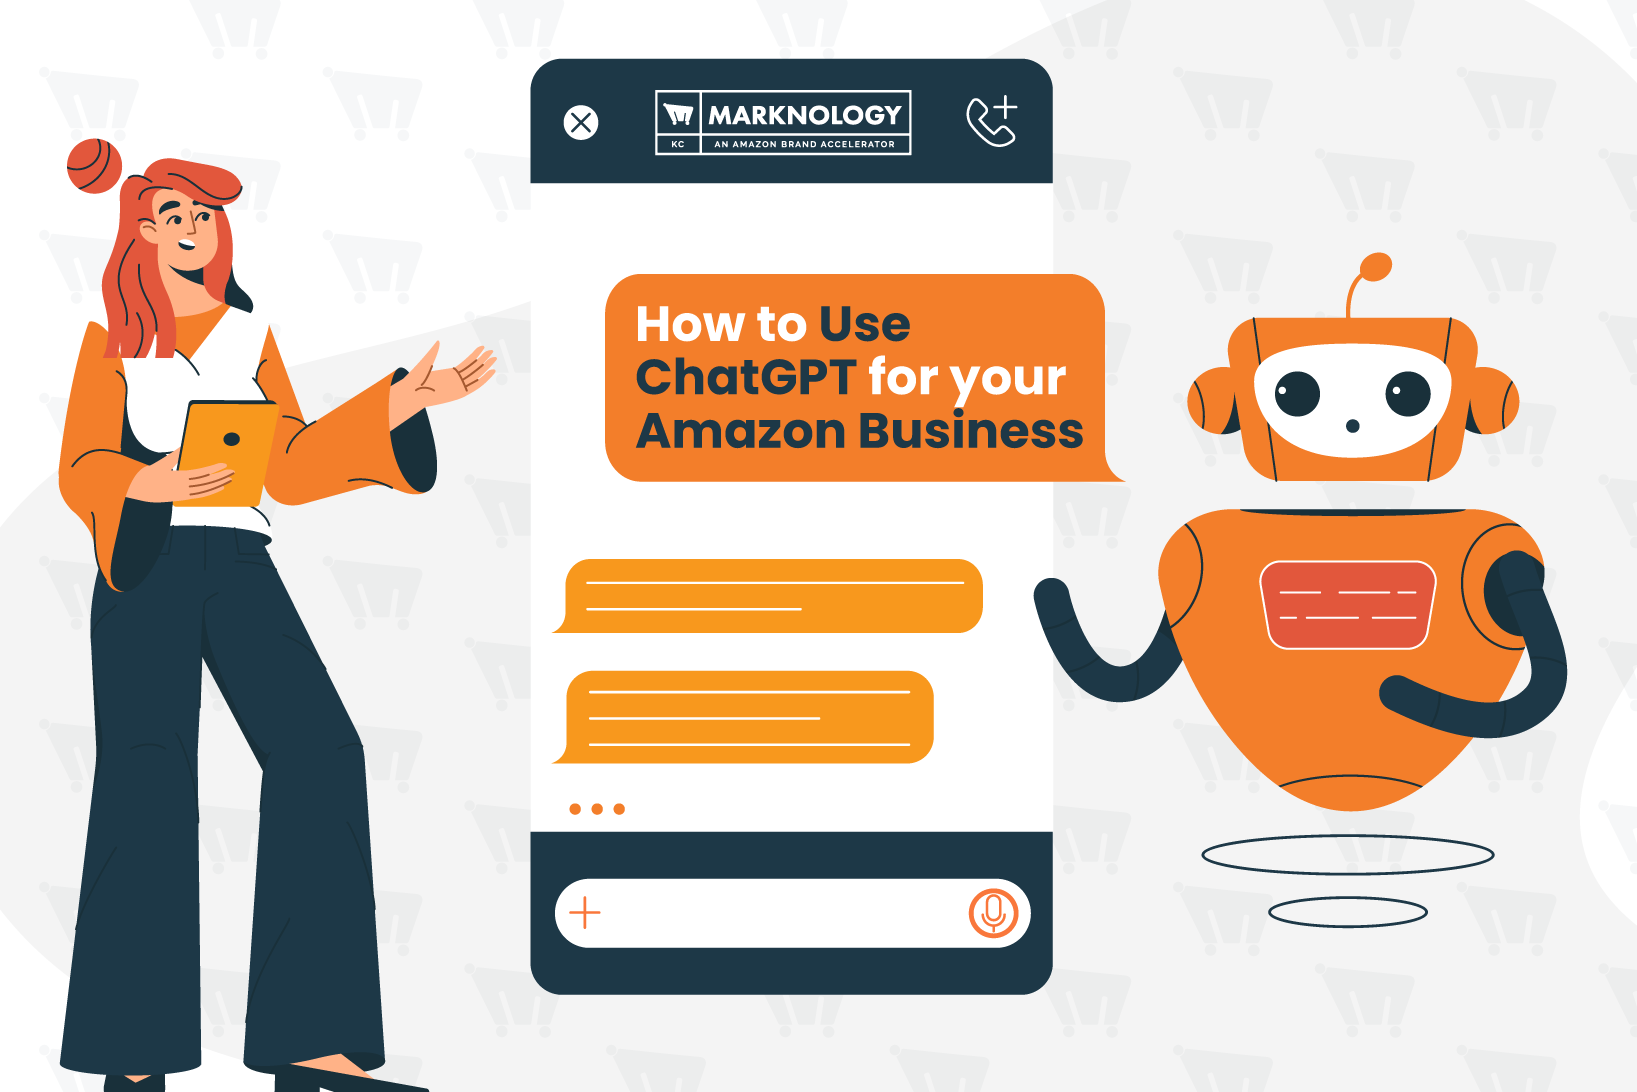 How to Use ChatGPT for your Amazon Business